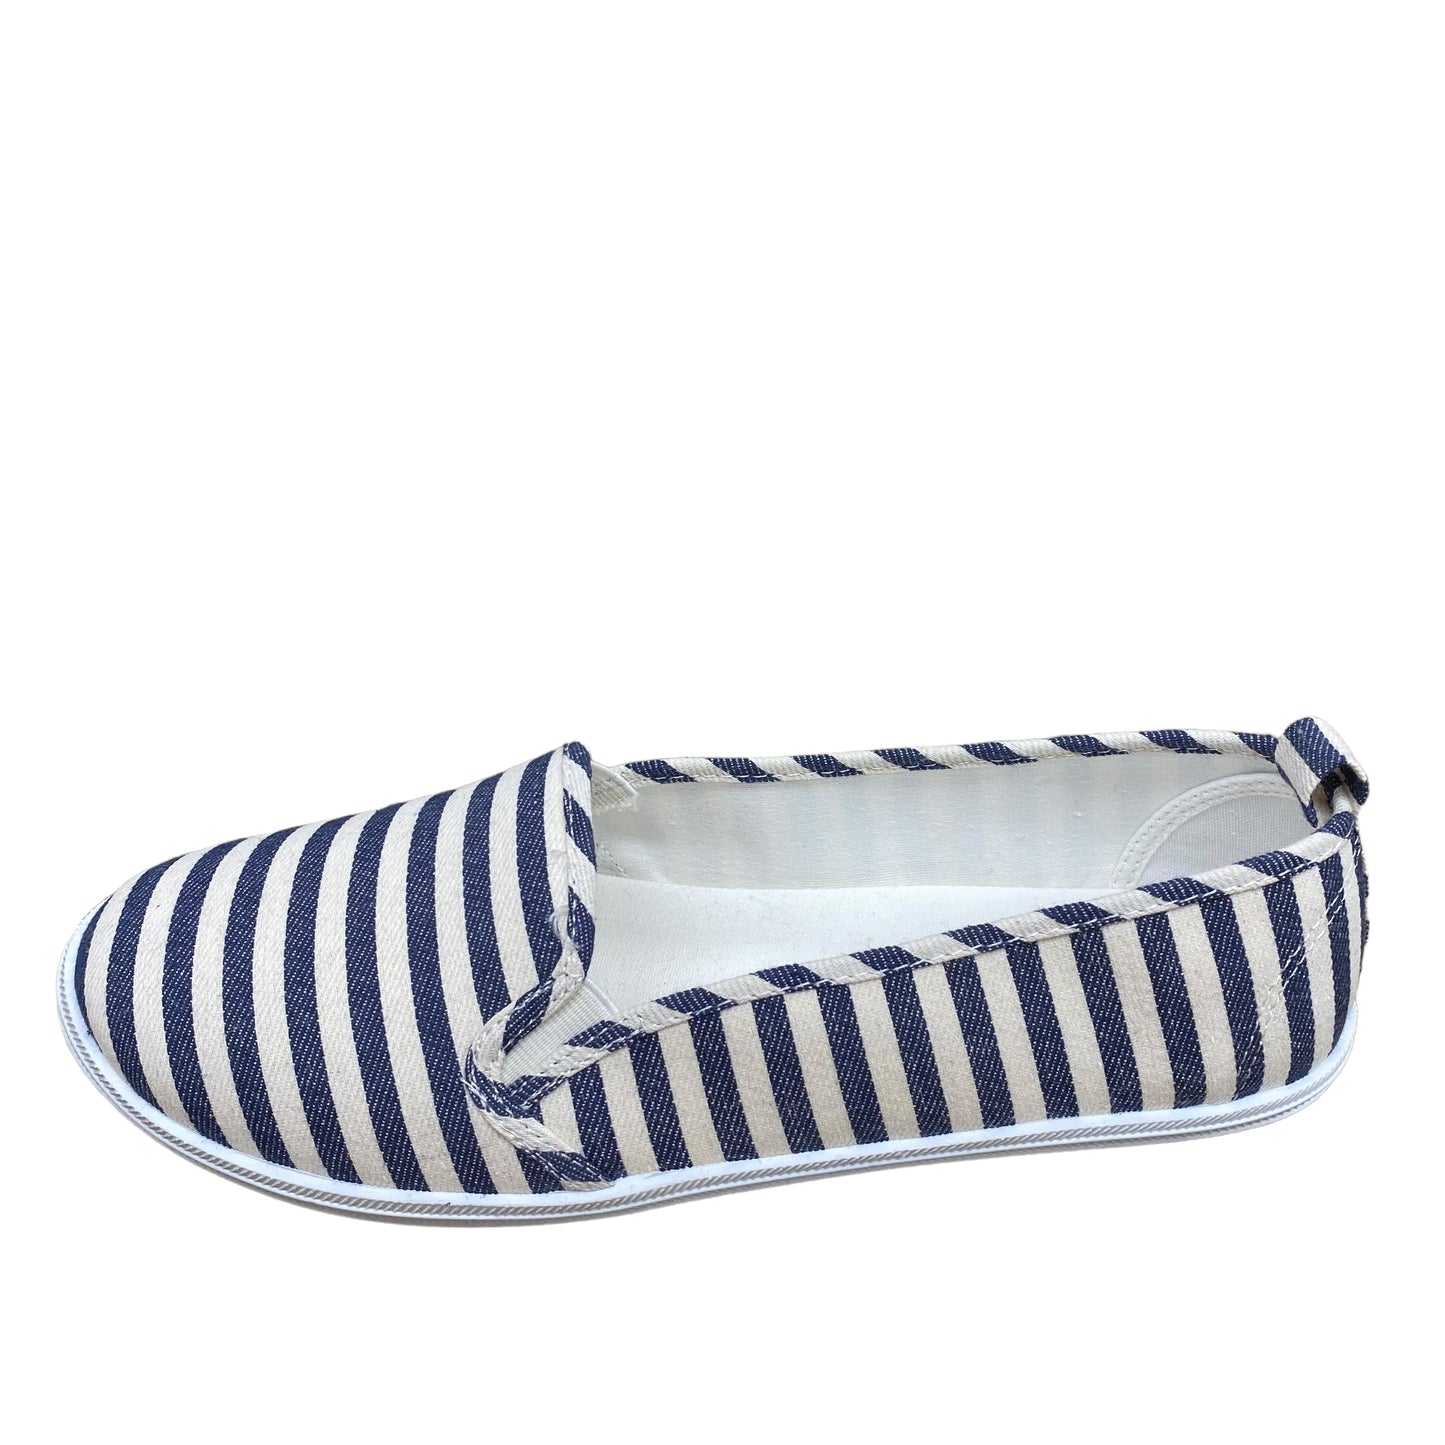 Shoes Flats Boat By Cmc  Size: 9.5